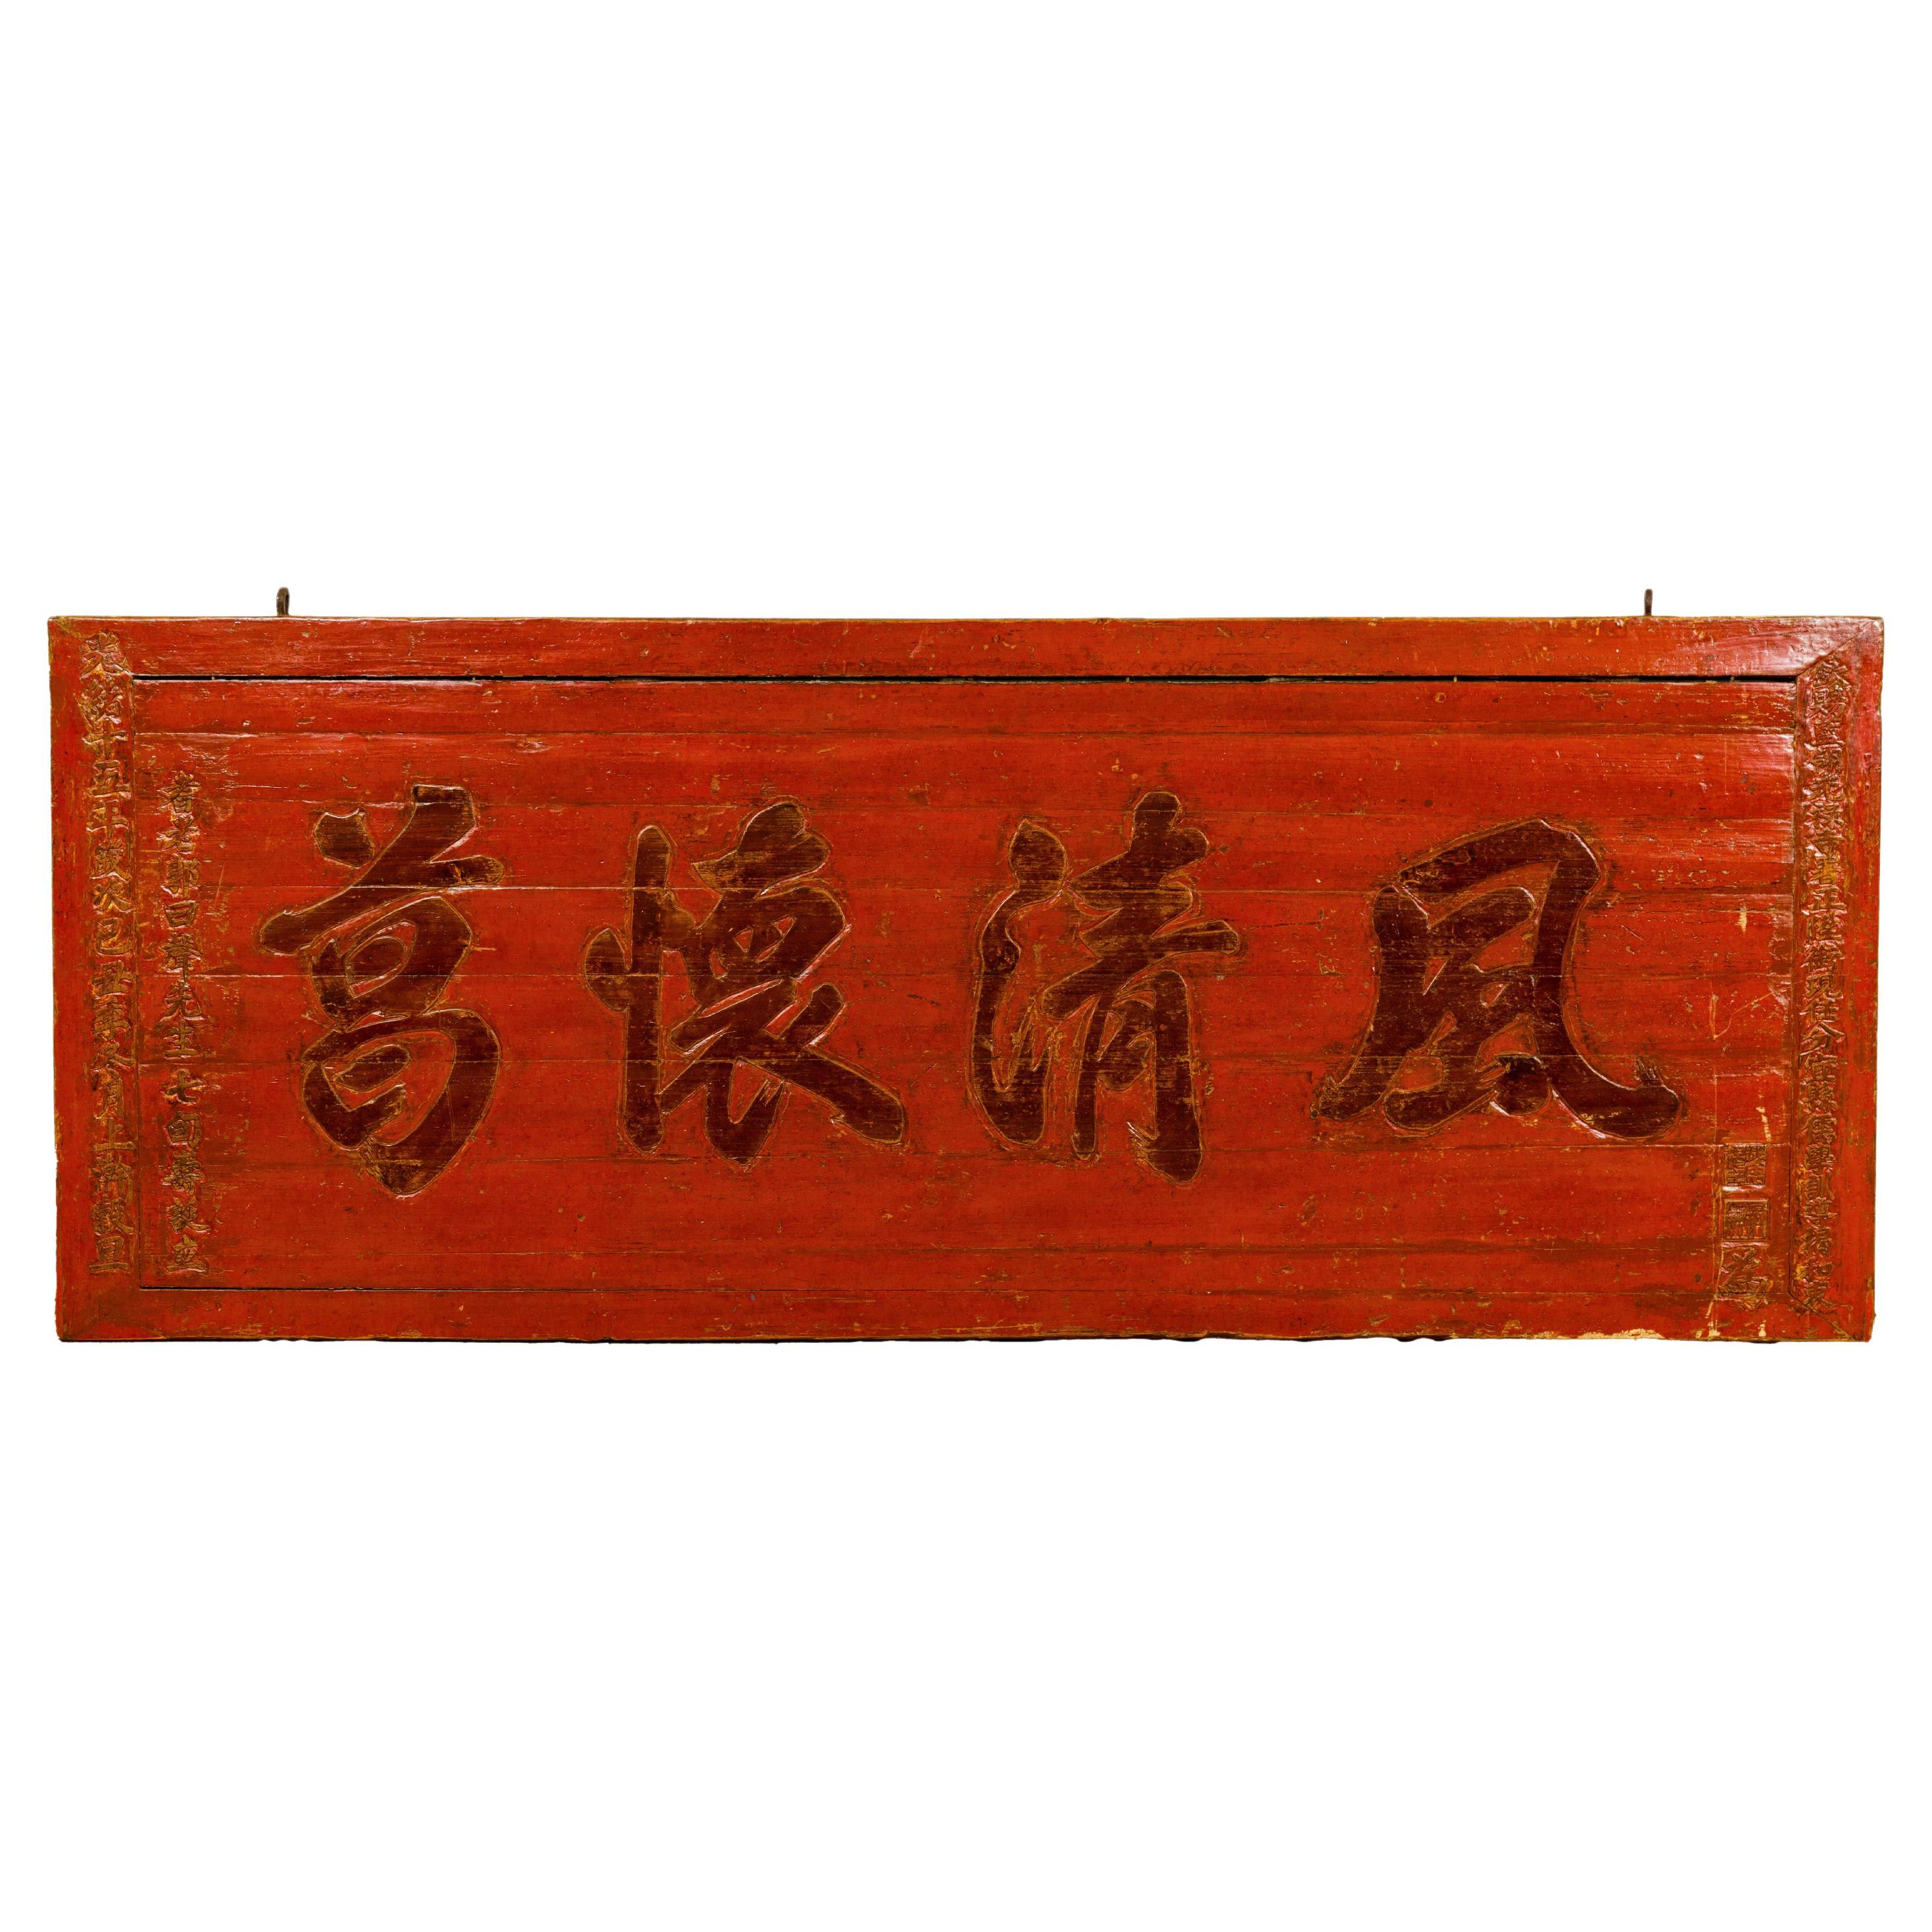 Chinese Qing Dynasty Period Red Lacquer Carved Shop Sign with Calligraphy